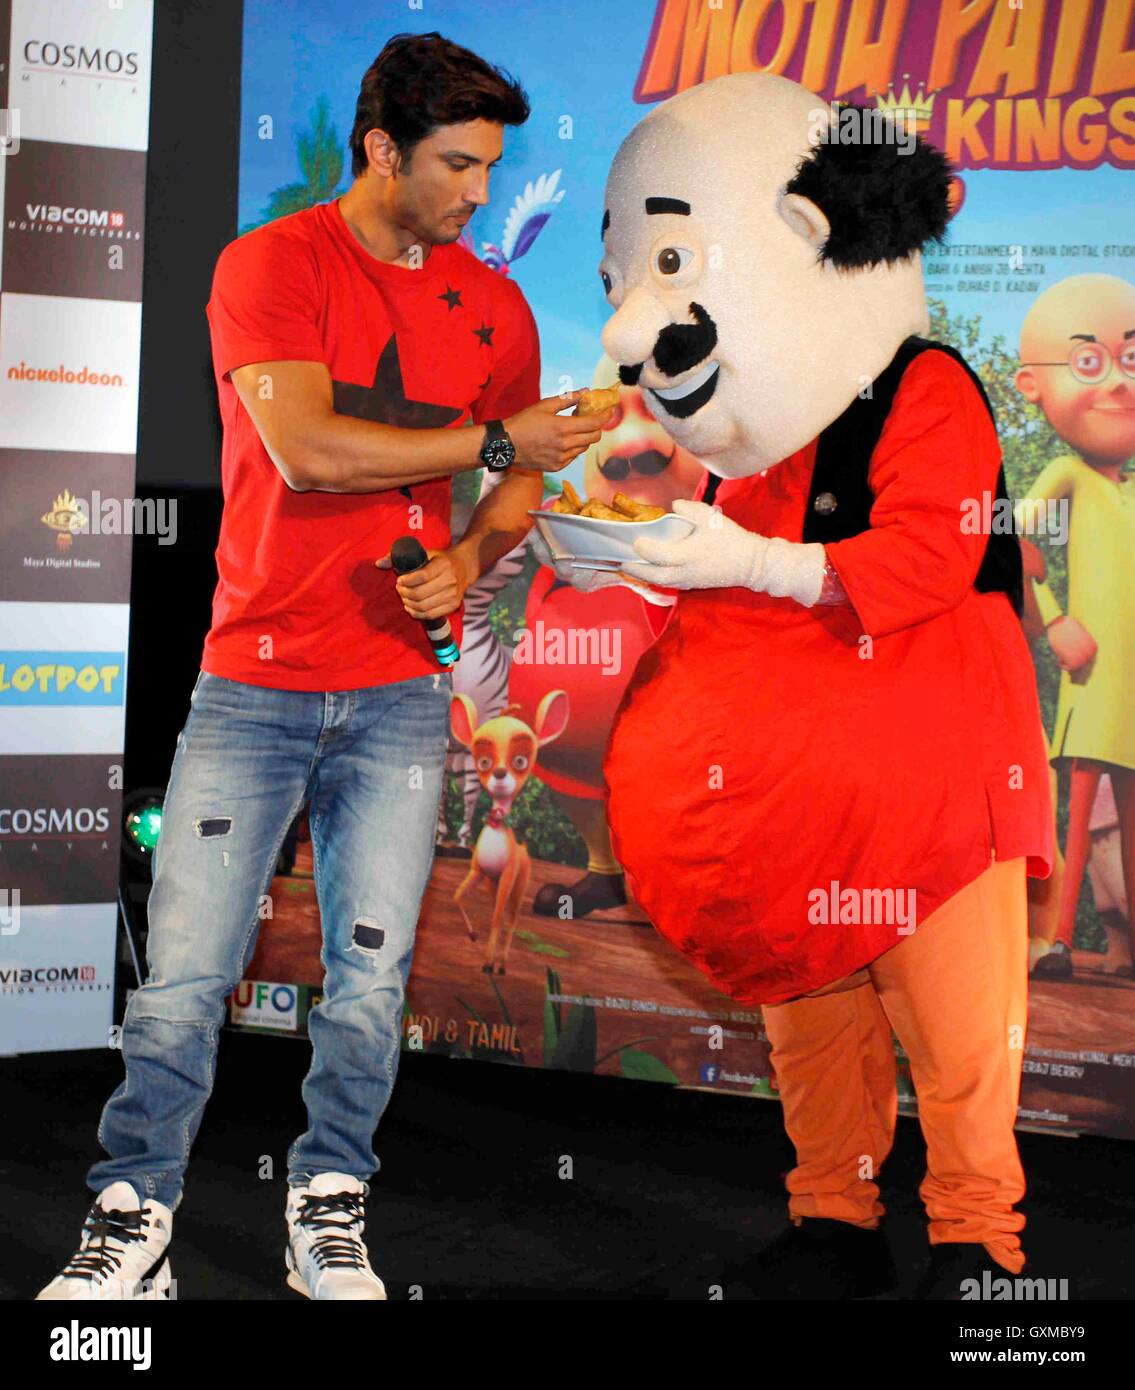 Sushant Singh Rajput ; Indian Bollywood actor at launch of first 3D  stereoscopic animated movie Motu Patlu King of Kings in Mumbai India Asia  Stock Photo - Alamy